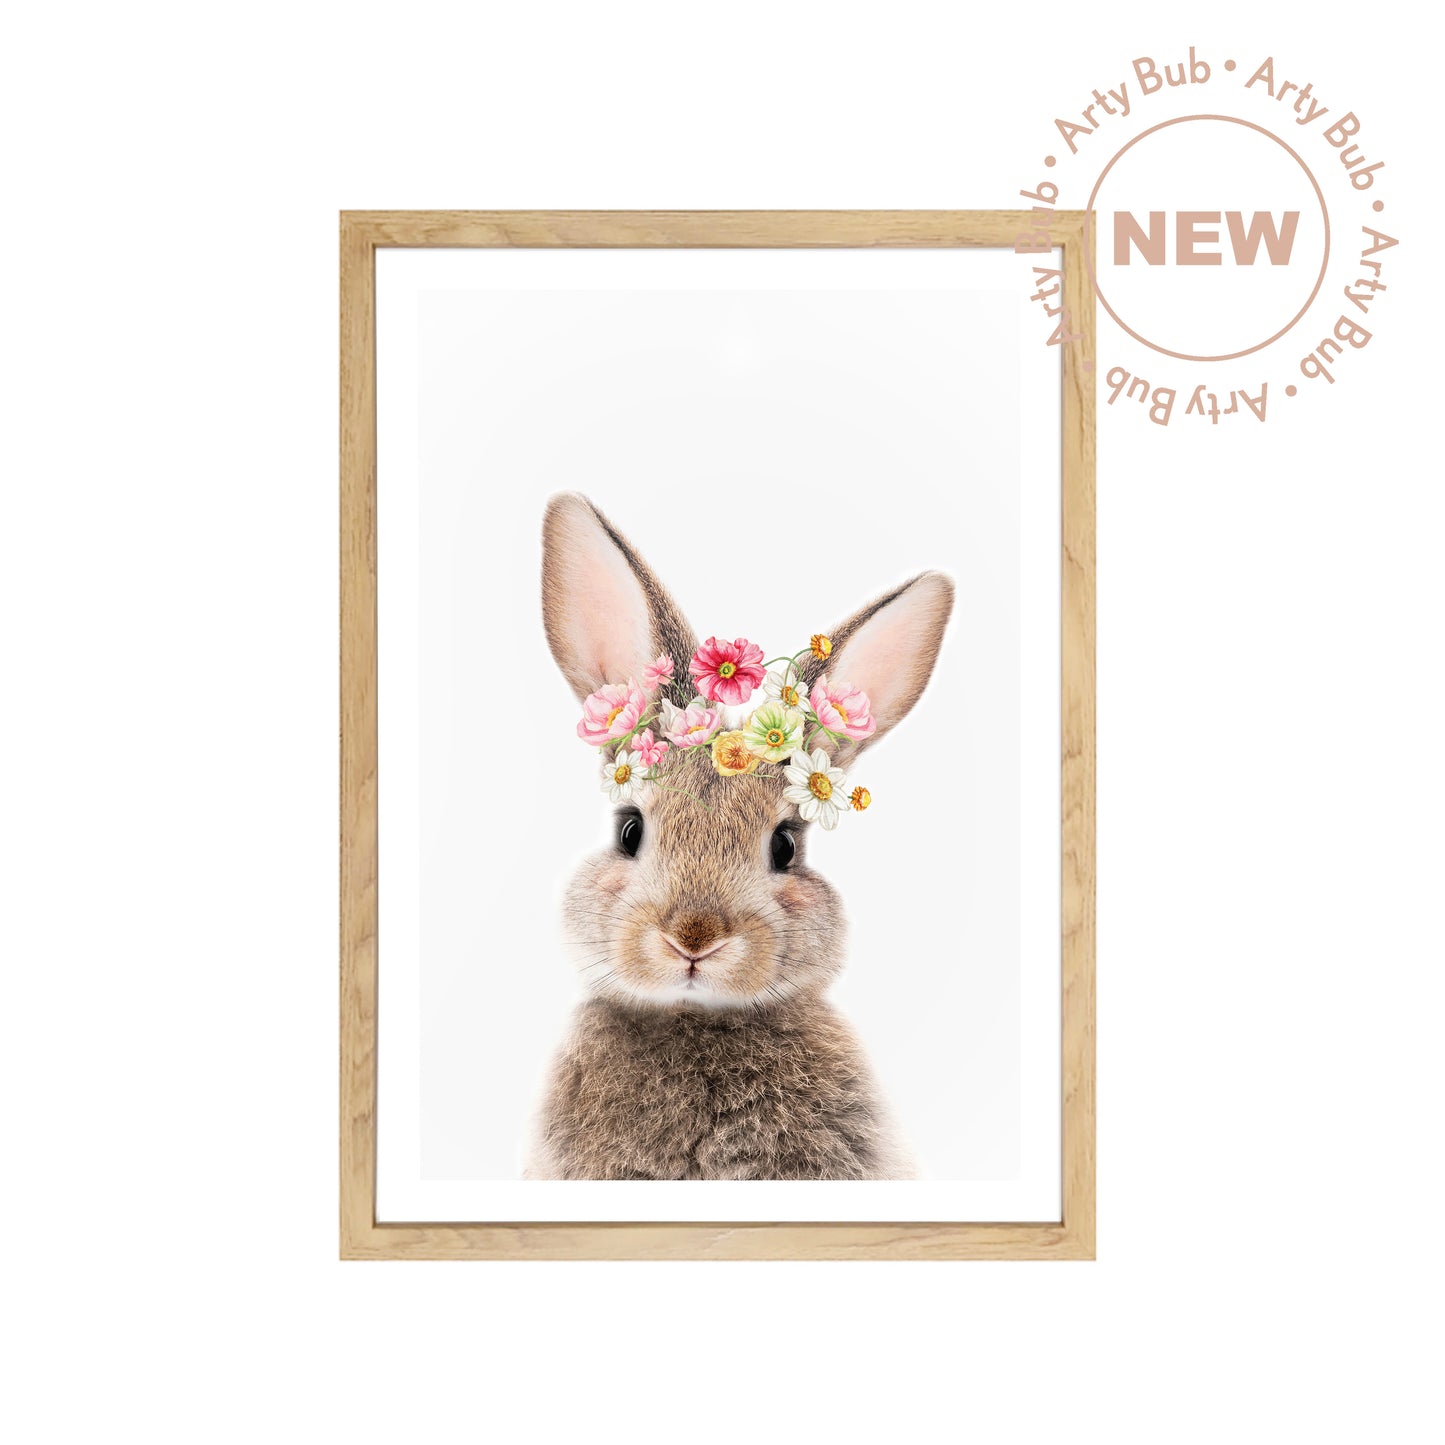 Baby Bunny Rabbit with Floral Crown